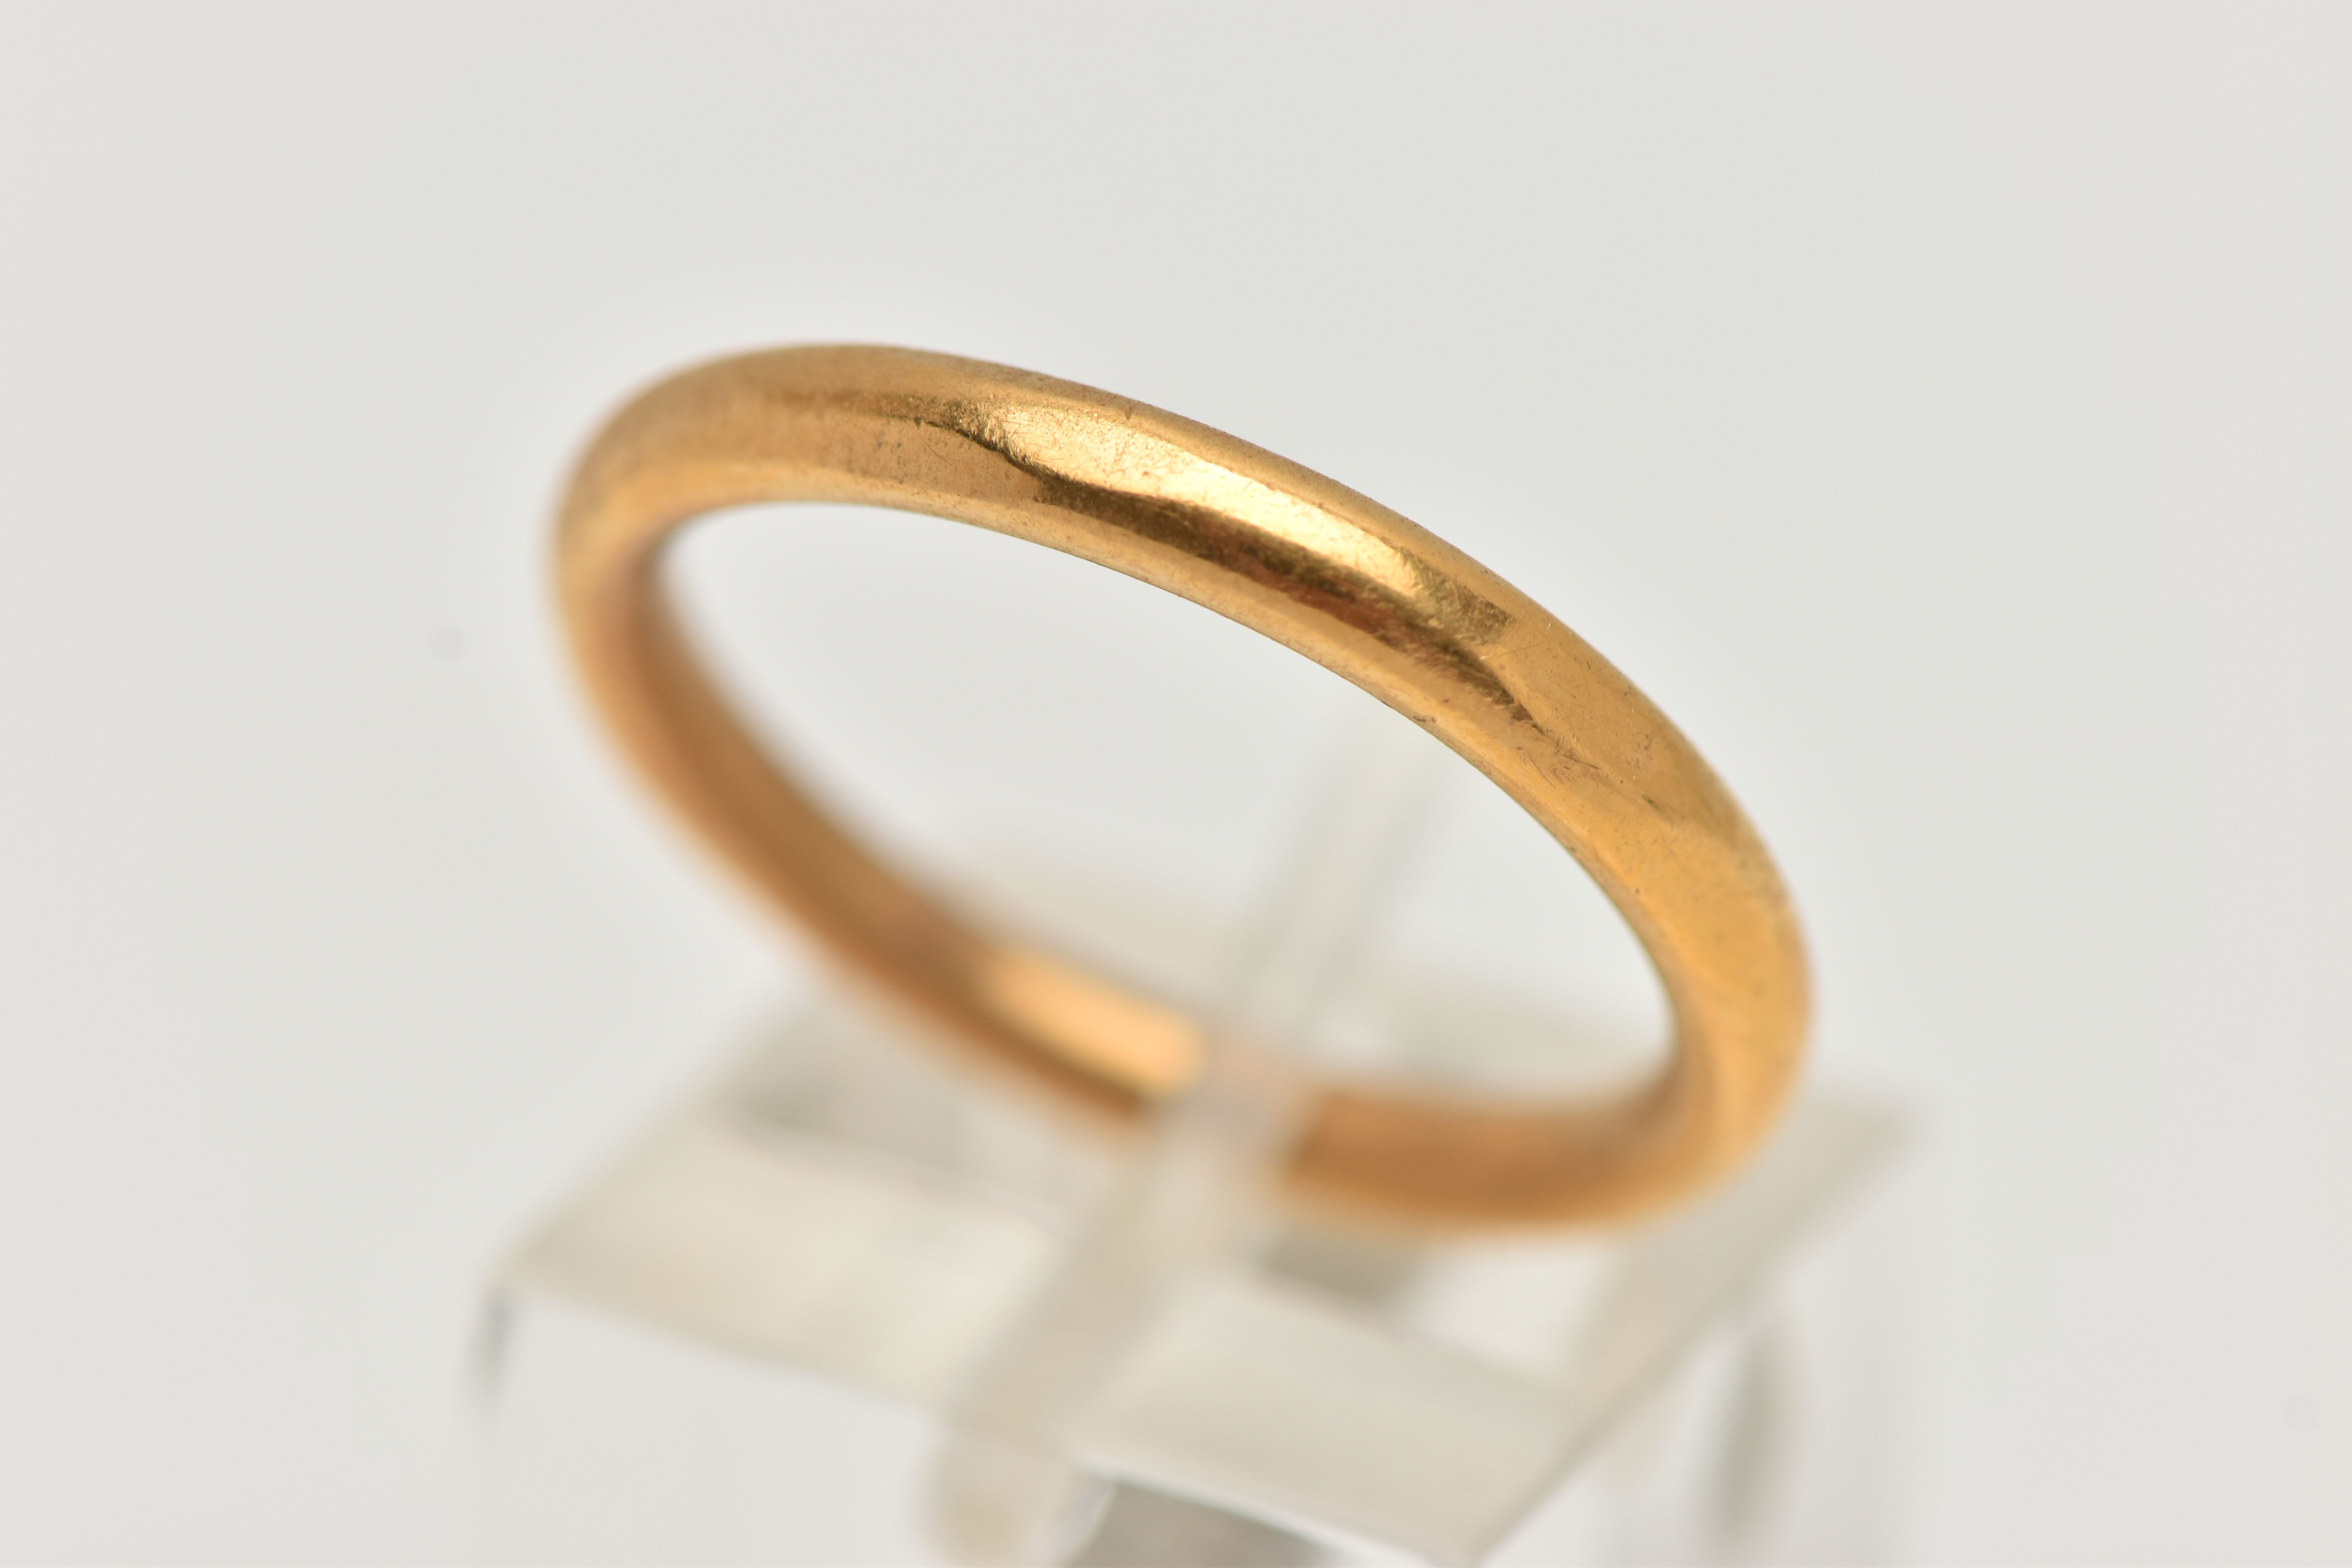 A 22CT GOLD BAND RING, polished band, hallmarked 22ct Birmingham, ring size P, approximate gross